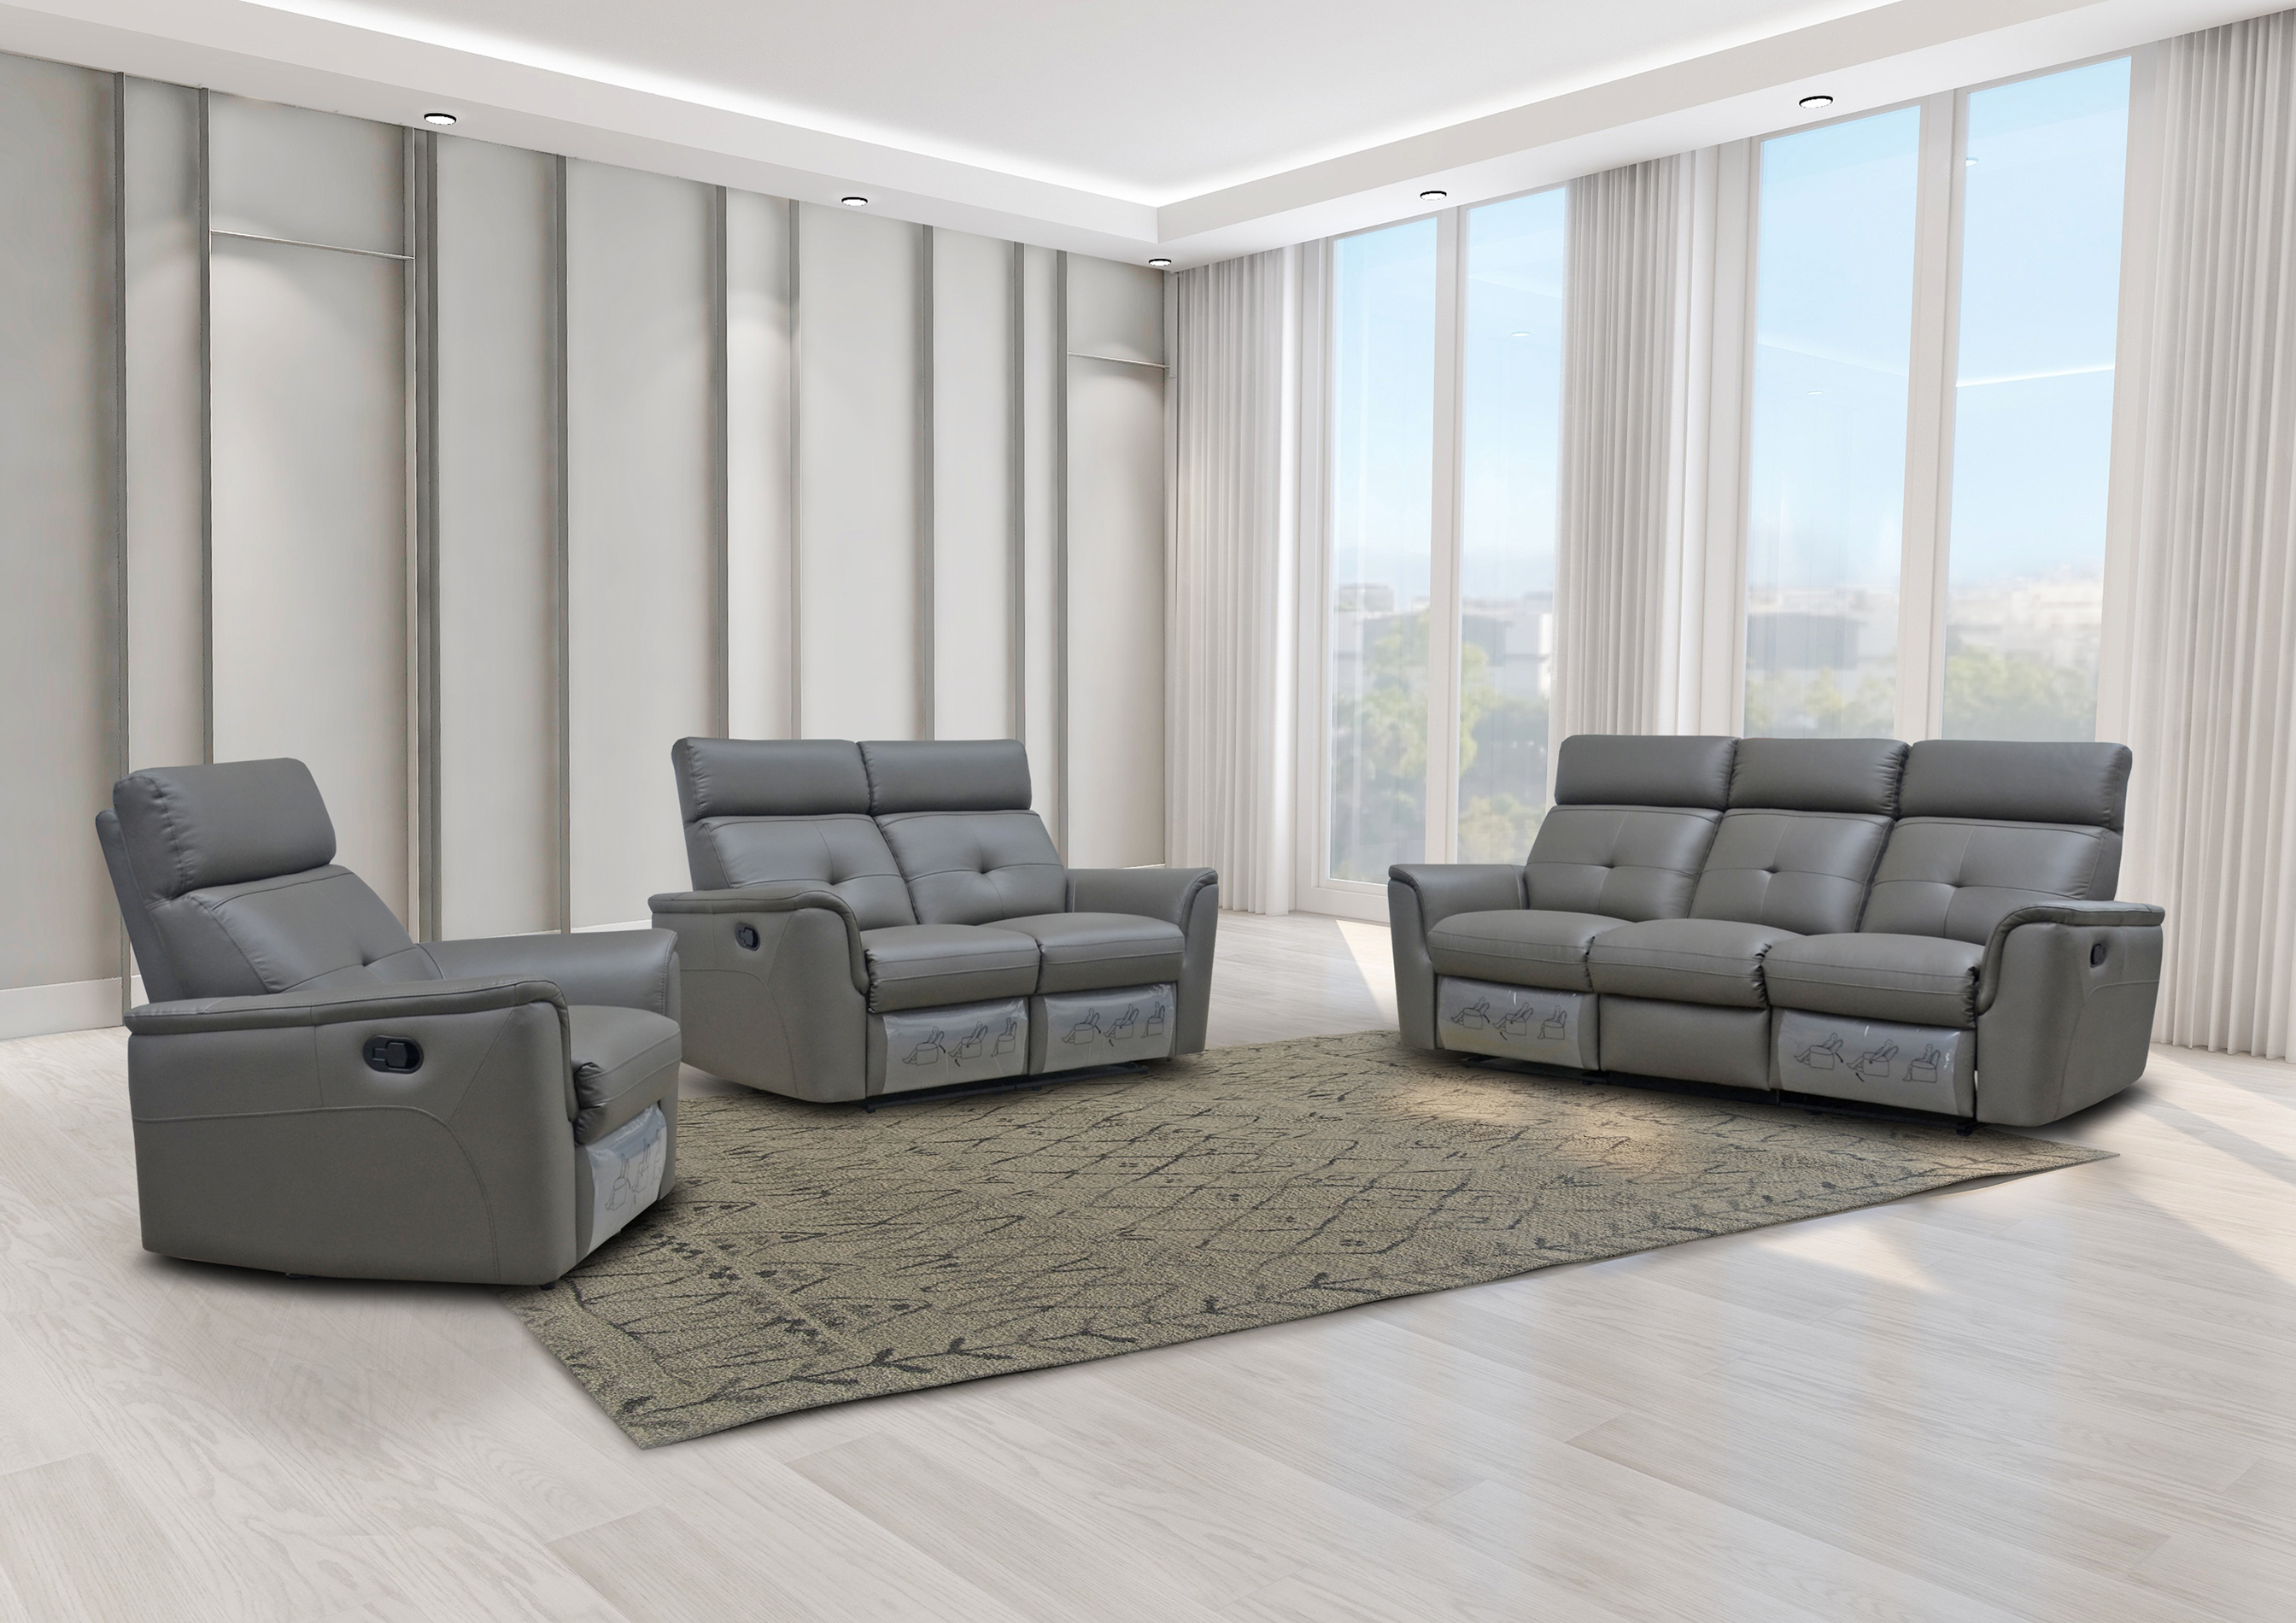 Contemporary Chic Leather Sofa Set